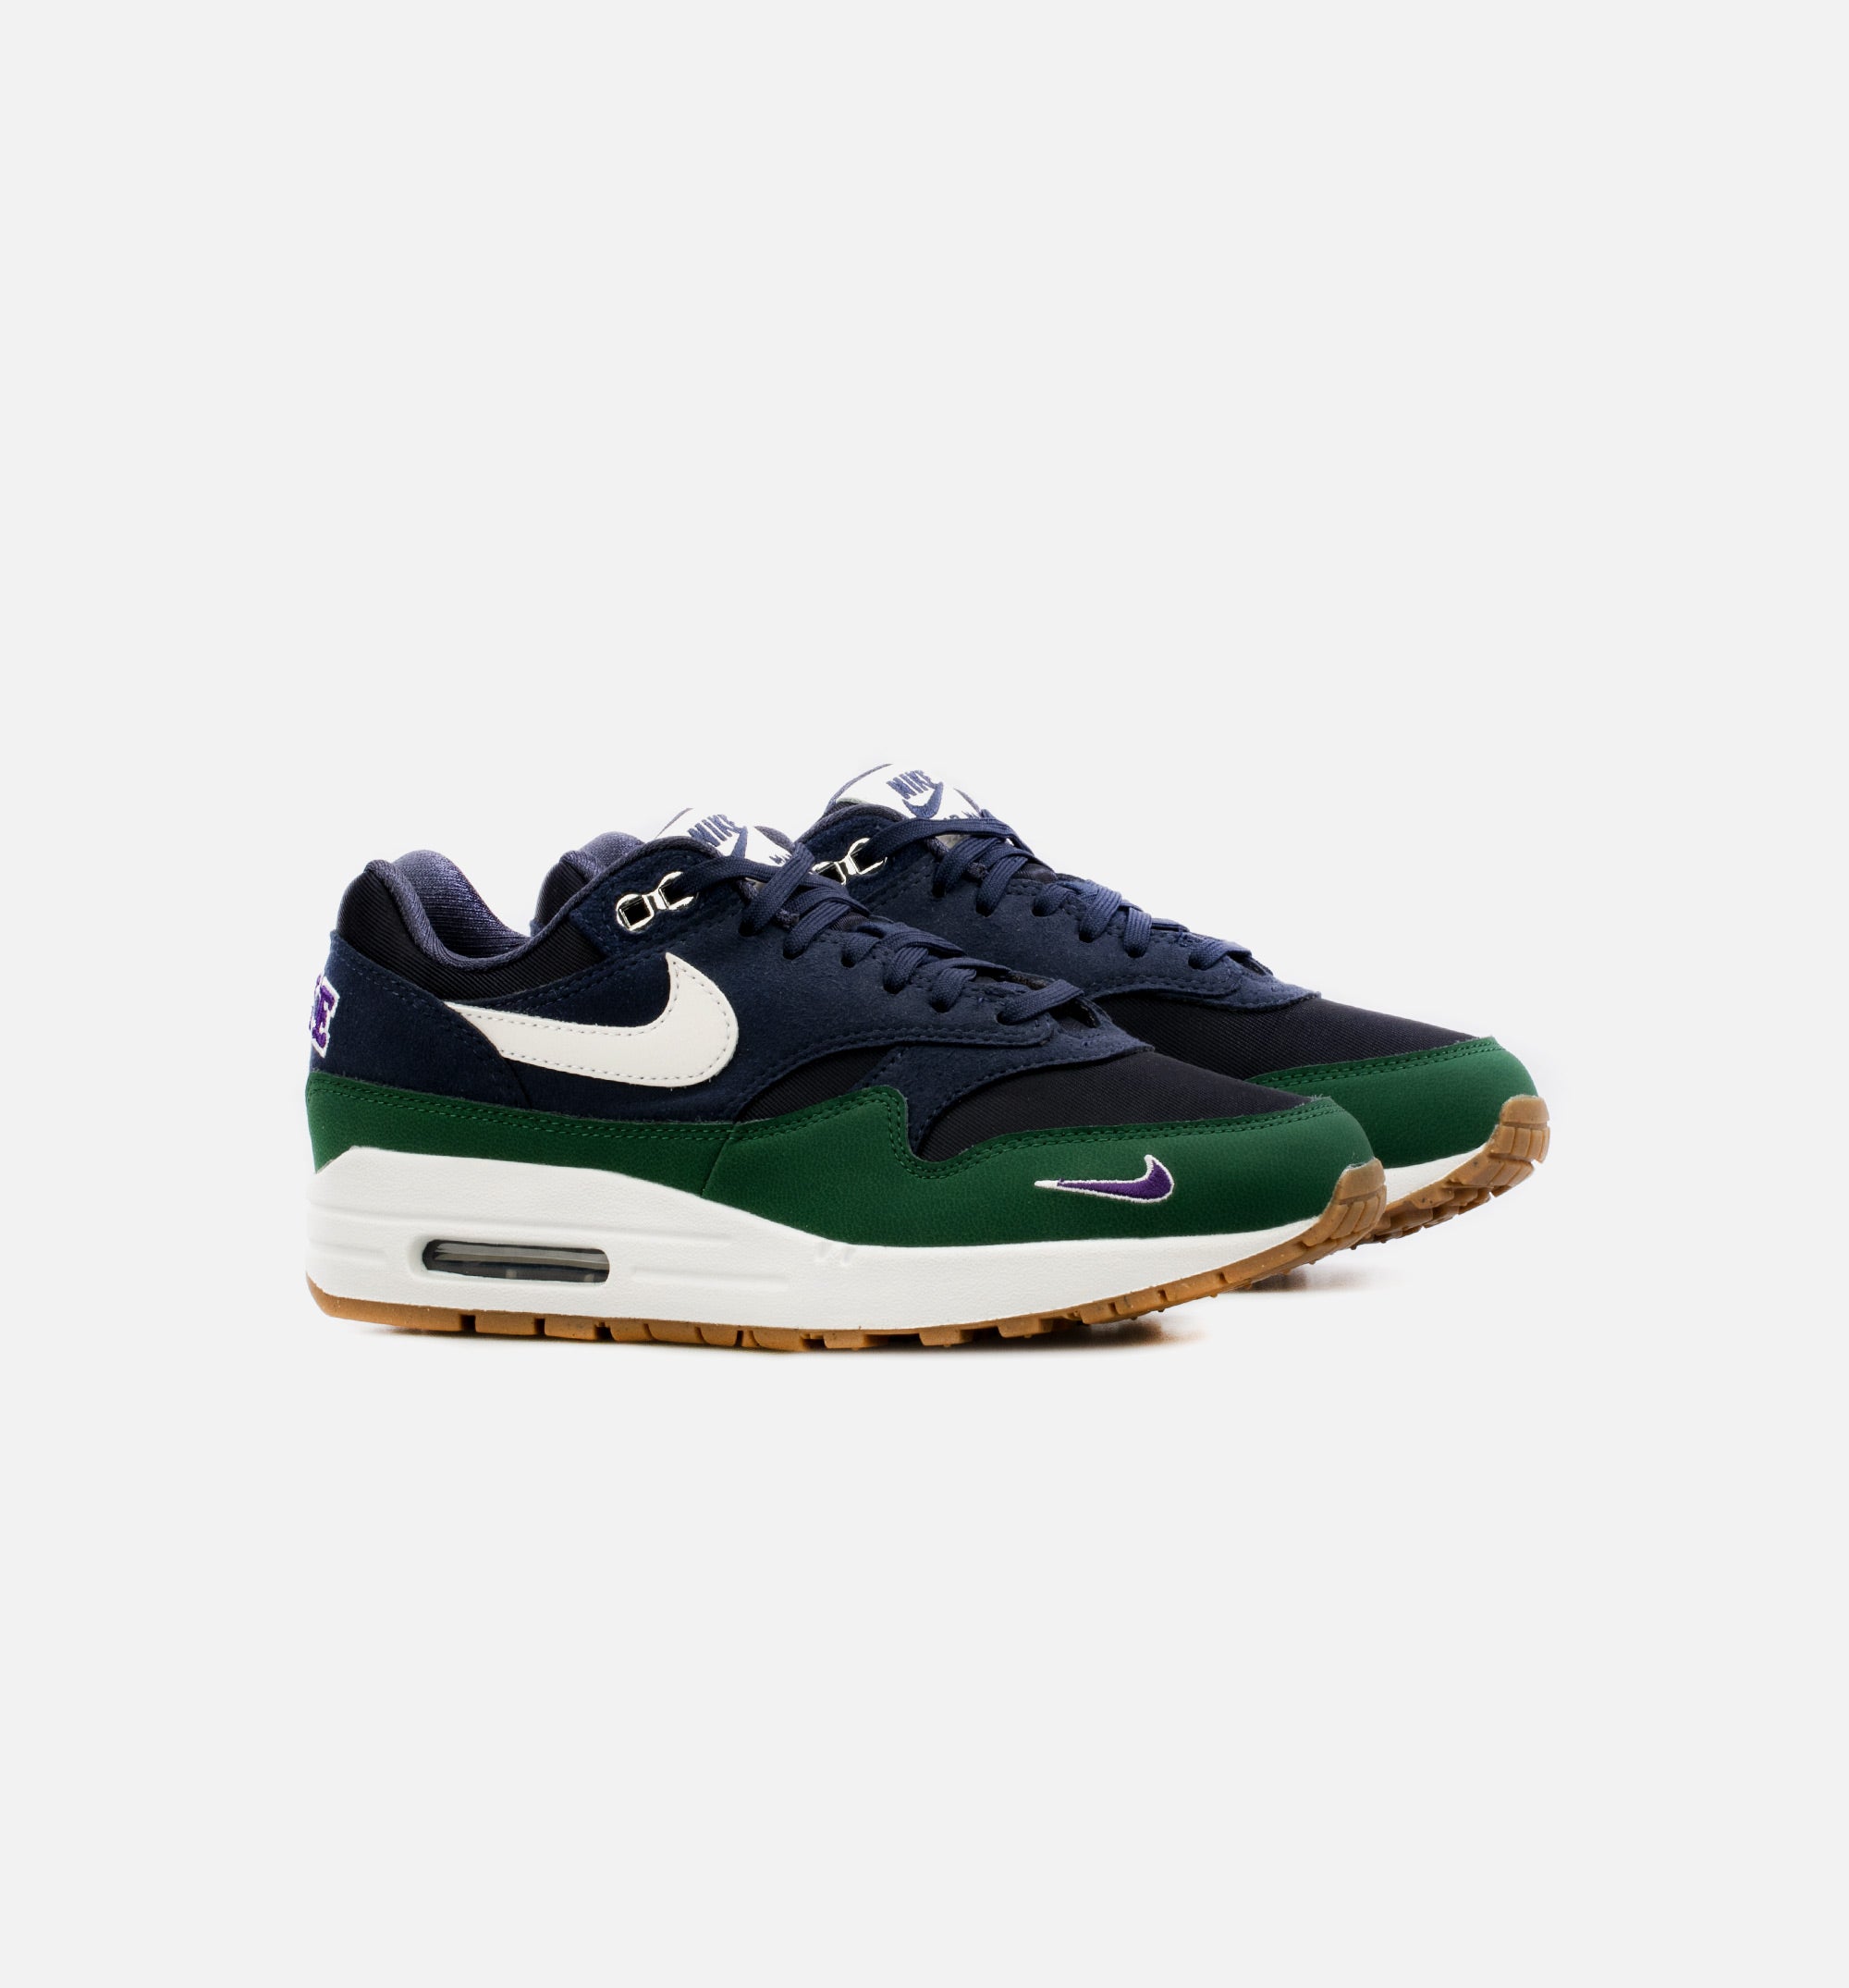 Sneaker Politics on Instagram: Nike Air Max 1 LV8 - Dark Teal Green $150  Men's Sizes 7.5 - 14 Available now online and at all locations. #AM87  #AirMax1 #SneakerPolitics